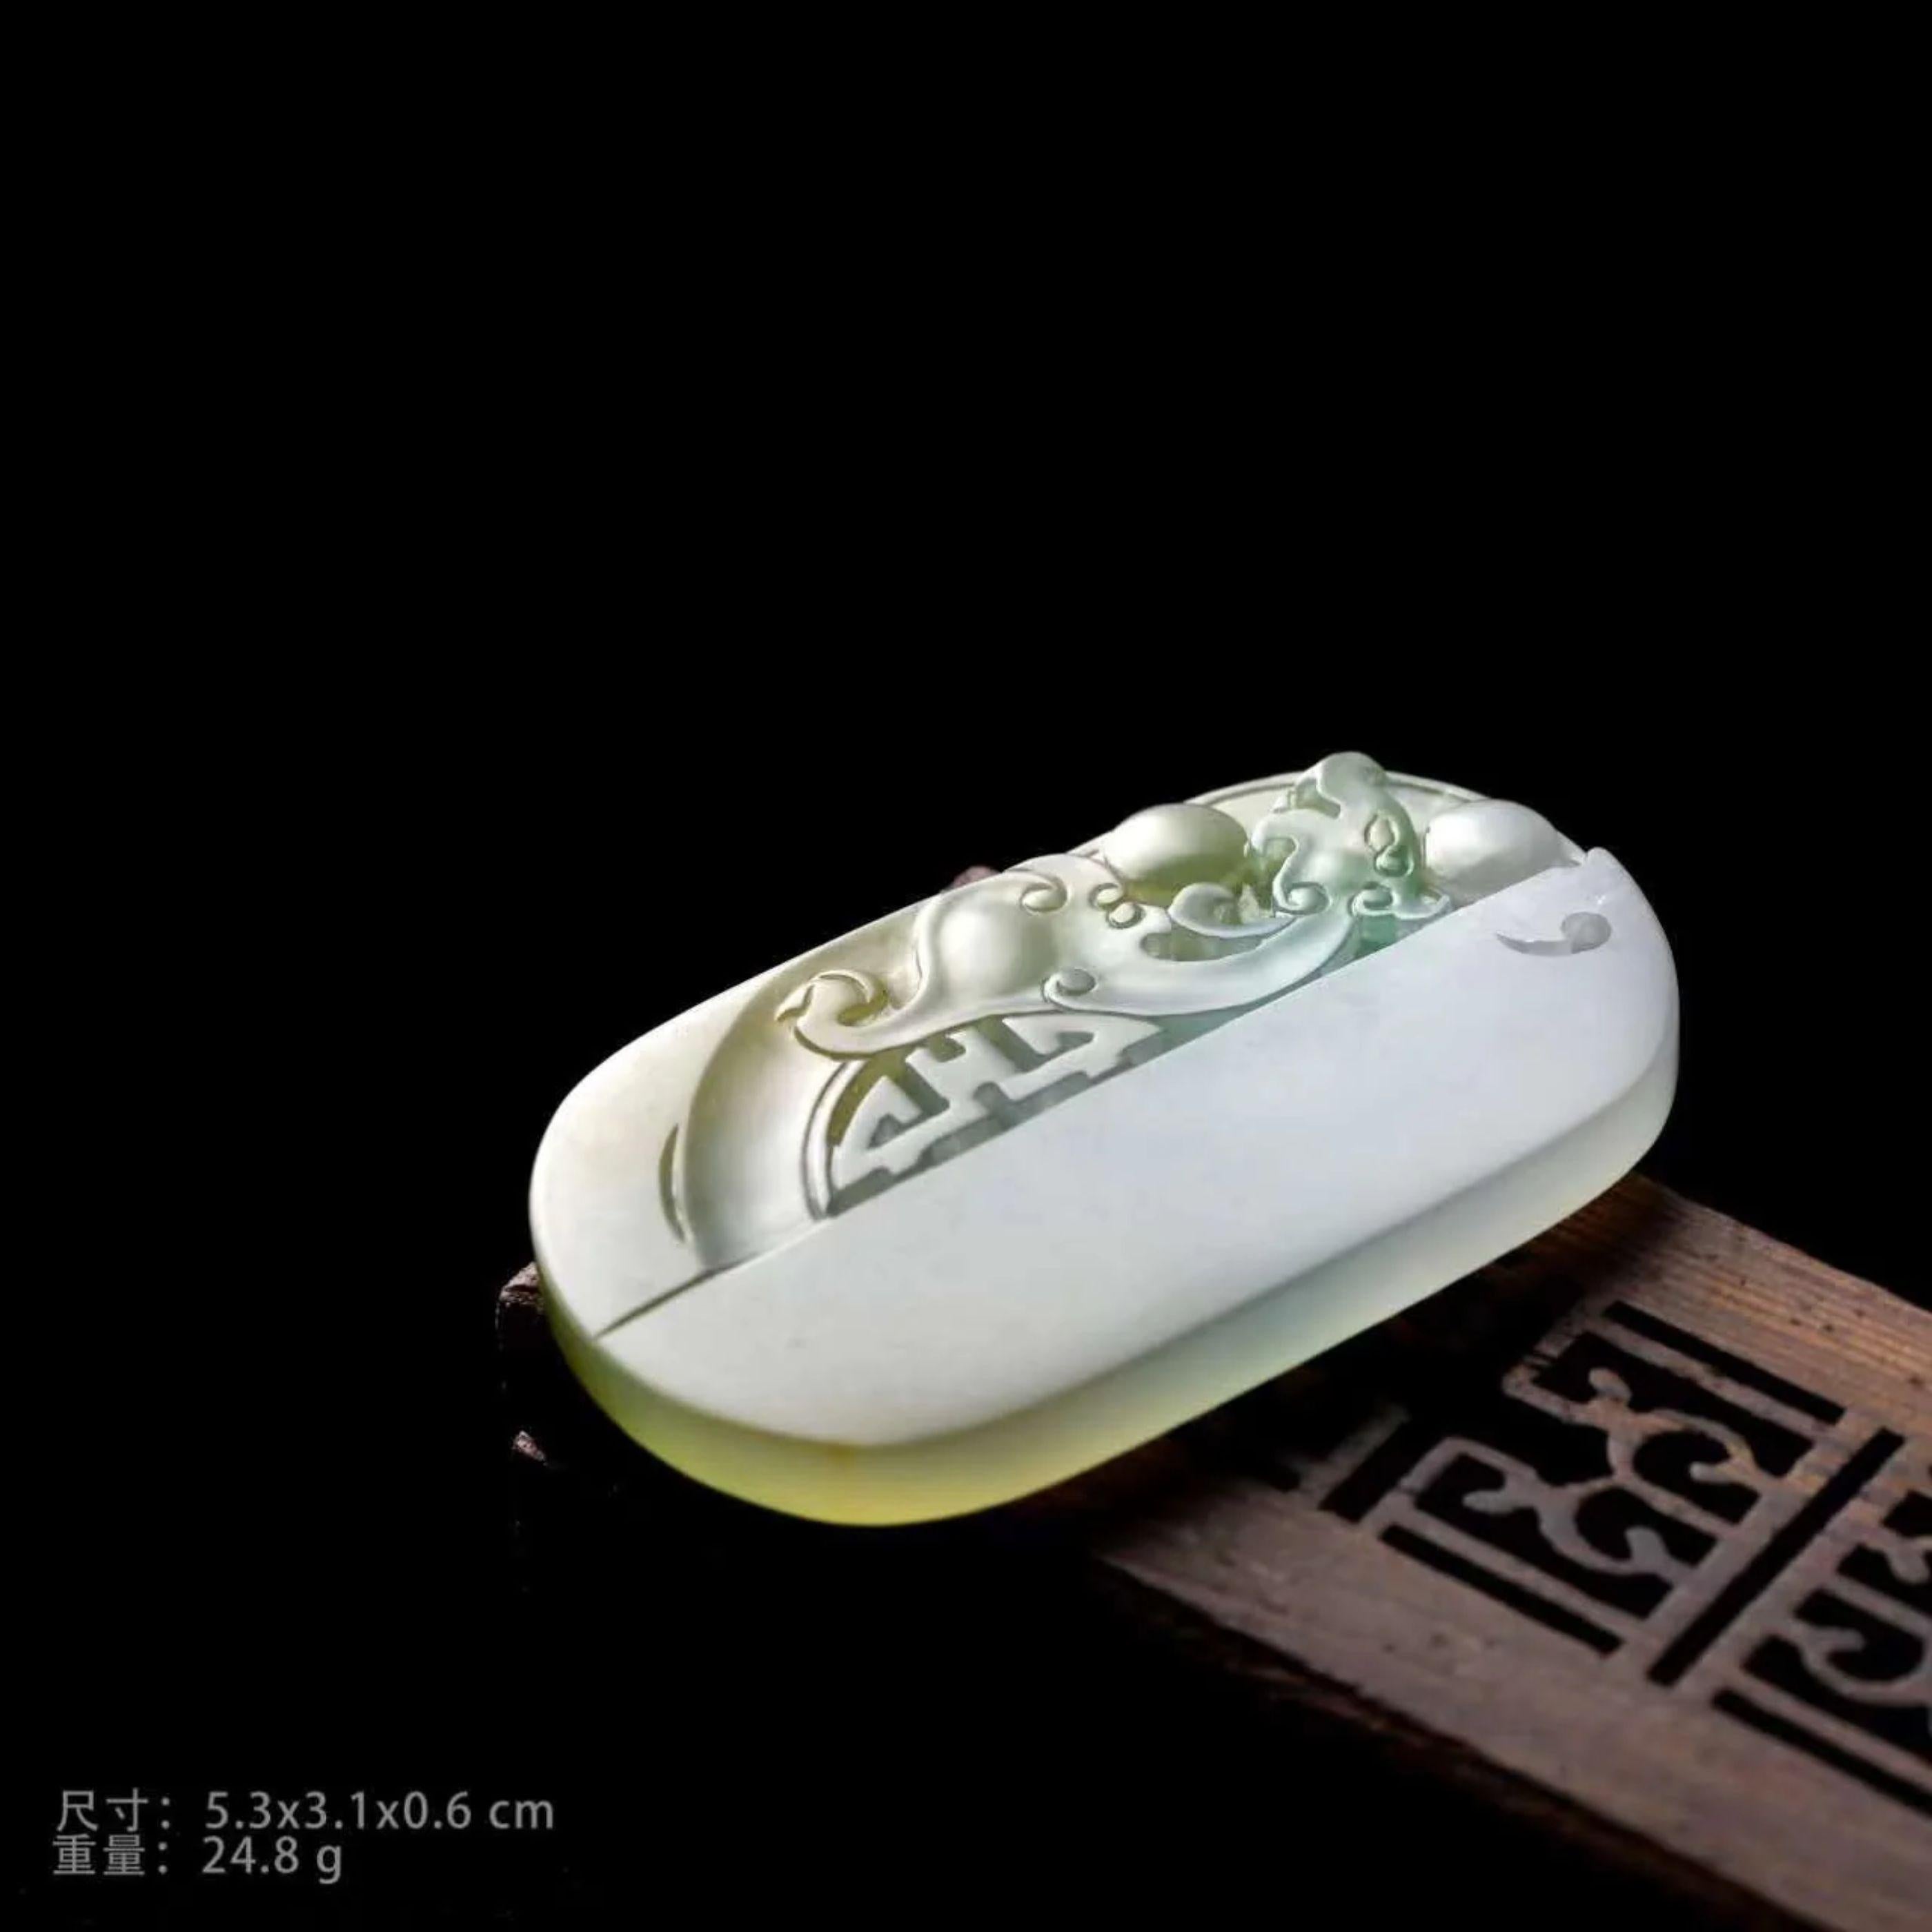 DESIGN CONCEPT--- This is jade culture. The carving is finished by a famous master. It's a very significant gift for you and your love for collectibles. We welcome special orders and personalized customization.

How it works: One-of-a-kind,